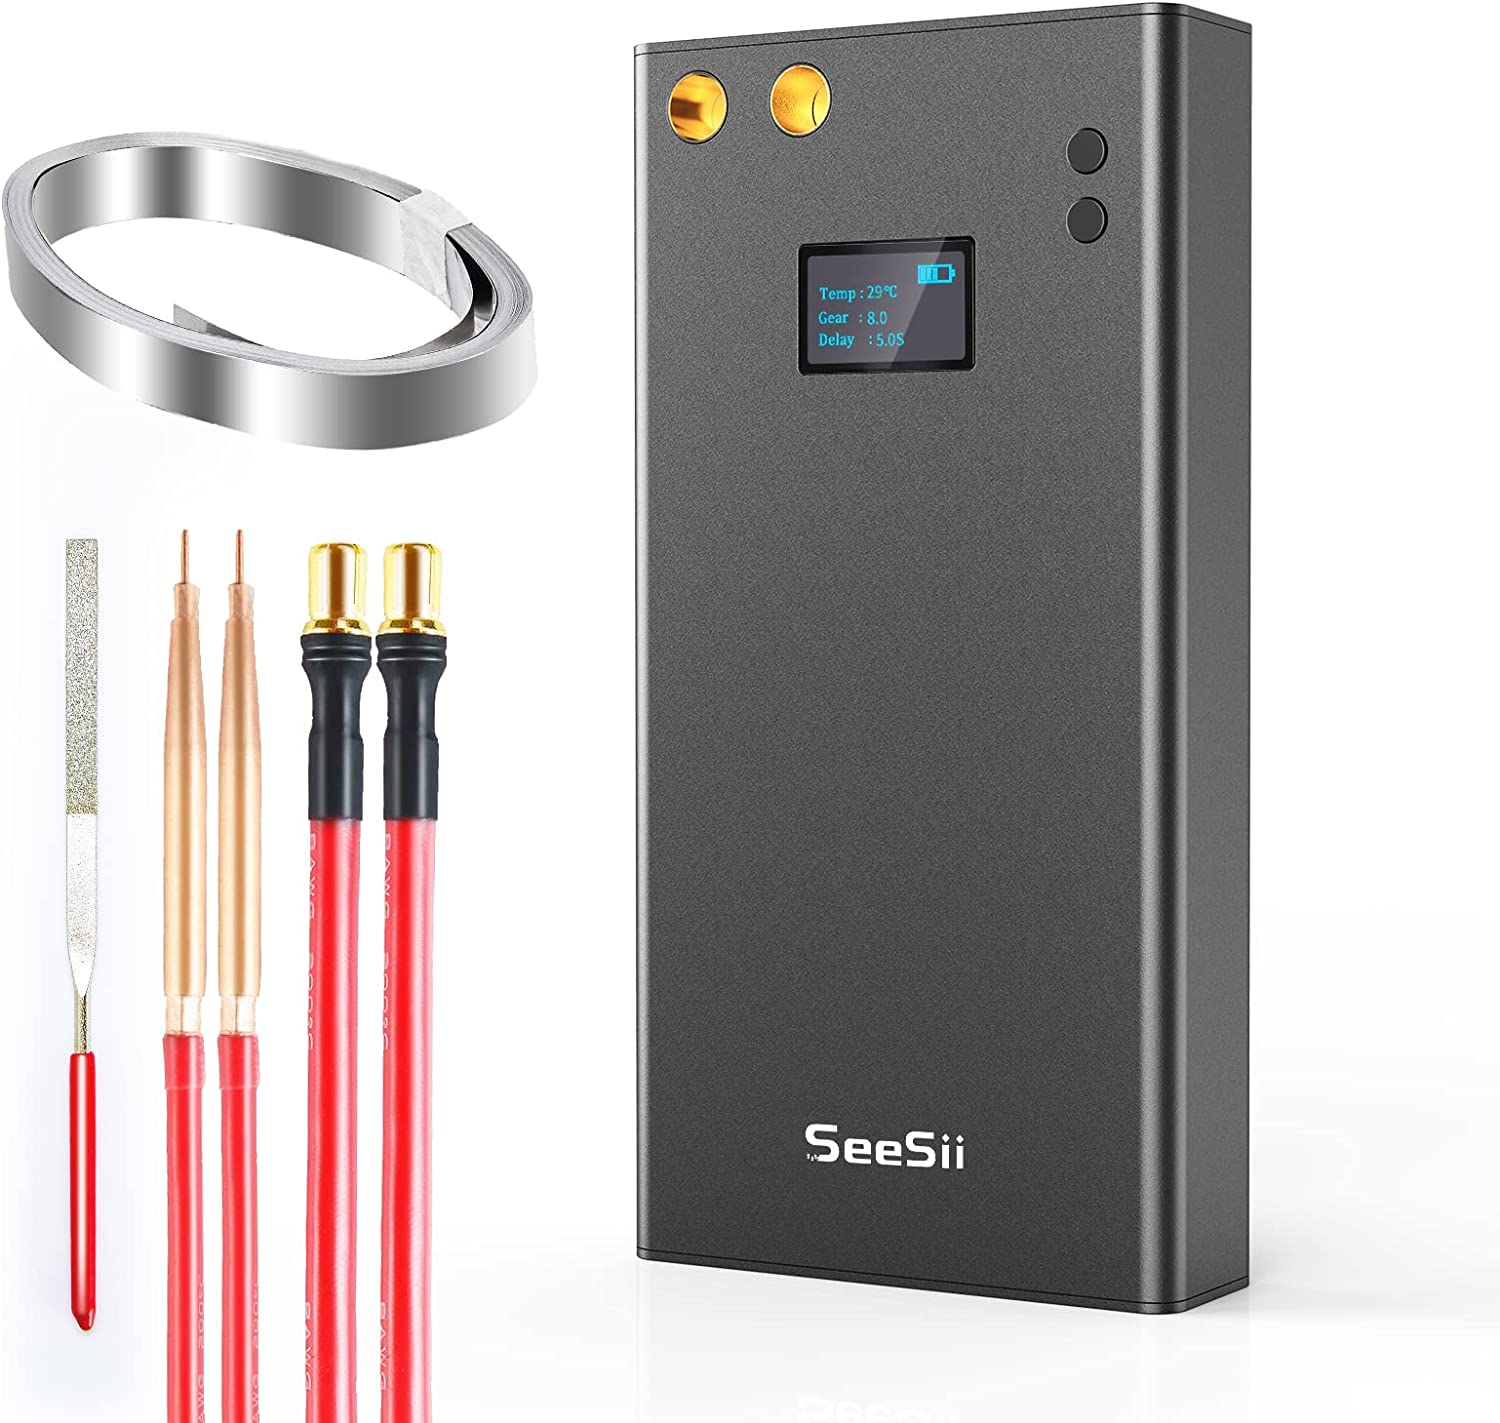 Upgraded Portable Spot Welder with LCD Screen, Seesii [...]